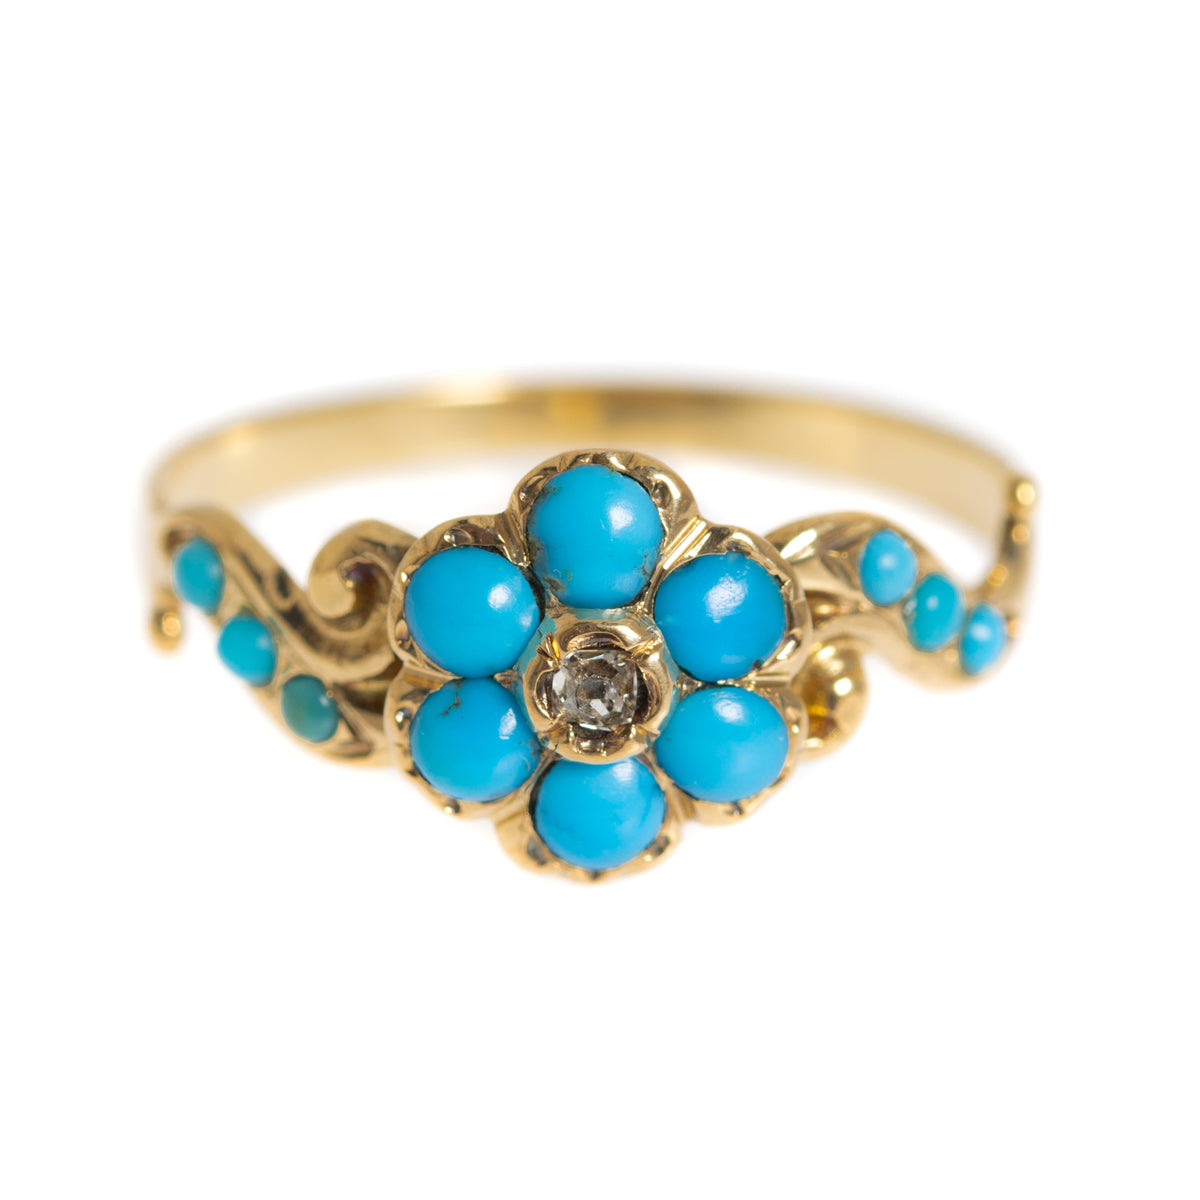 Antique Victorian 18ct Gold Turquoise & Mine Cut Diamond Daisy Ring c1880 (A1253)